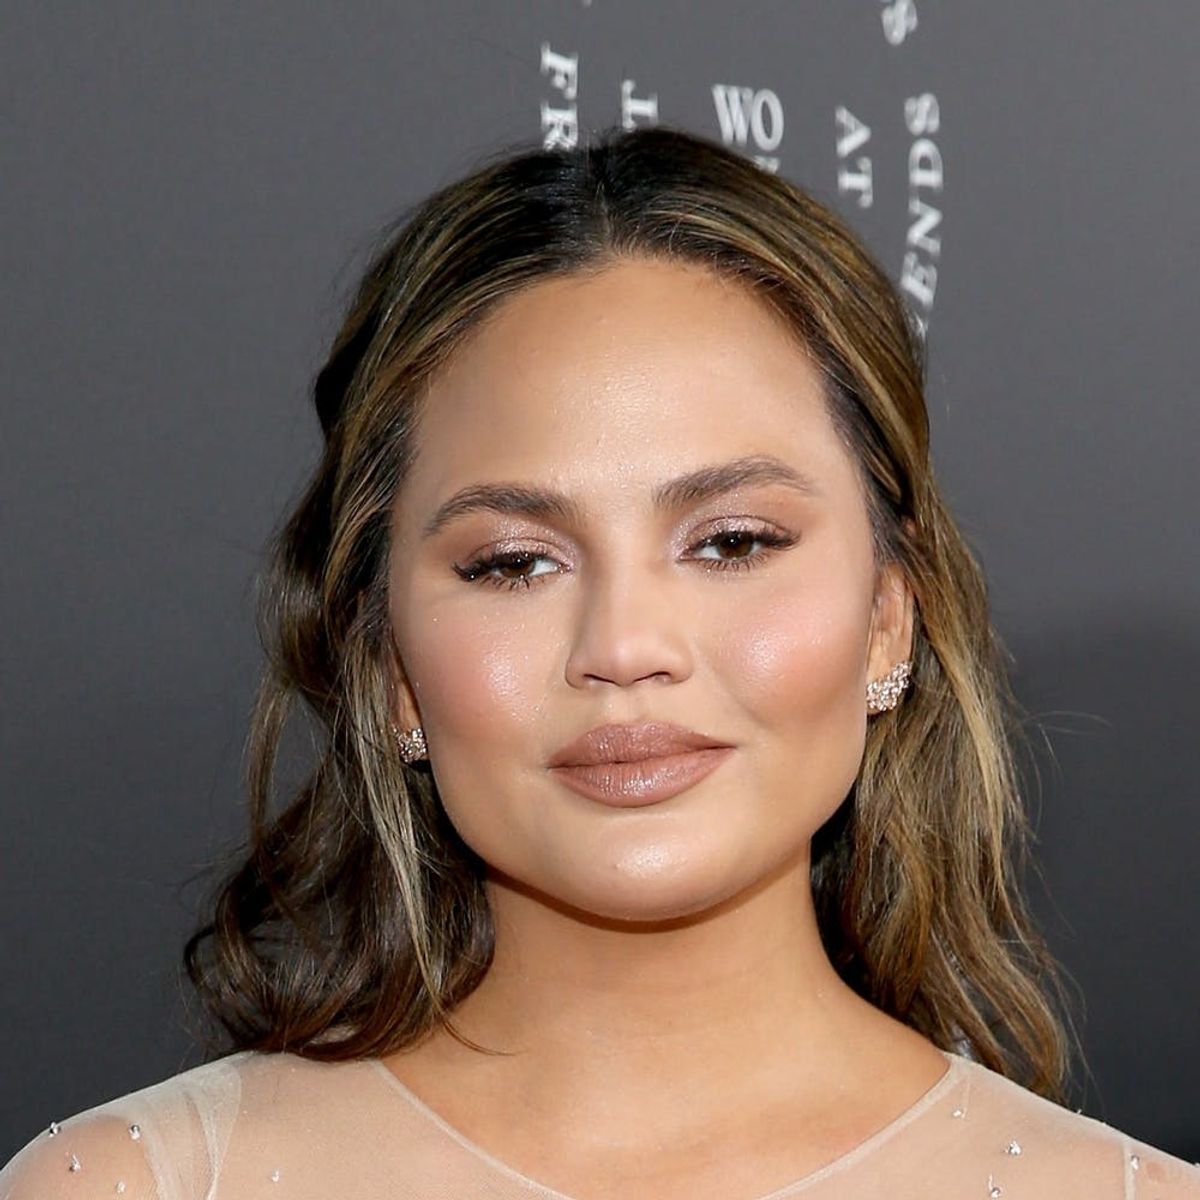 Chrissy Teigen Has Offered to Pay McKayla Maroney’s Fine for Speaking Out Against Larry Nassar